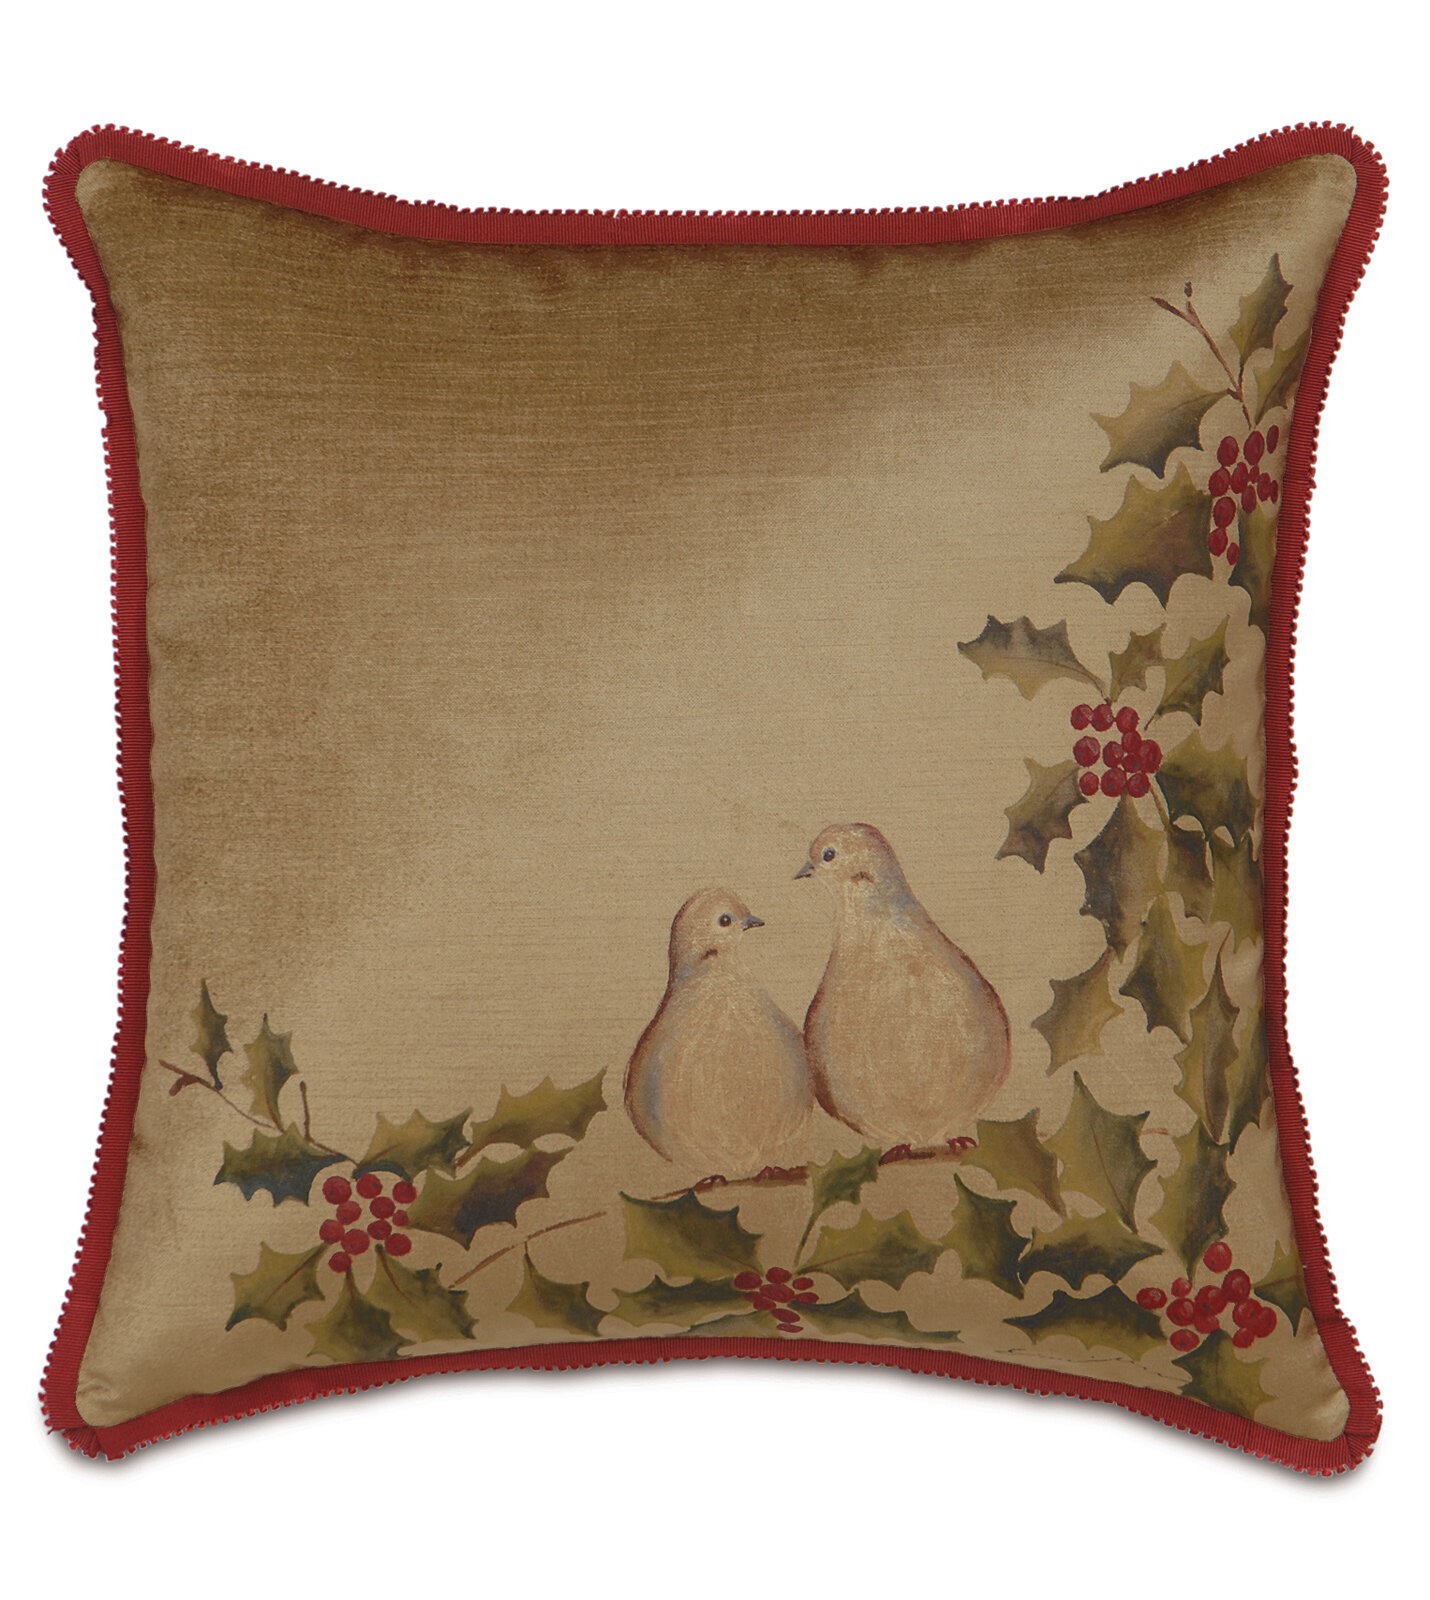 Holiday by Studio 773 Tree Christmas Pillow Cover & Insert Eastern Accents